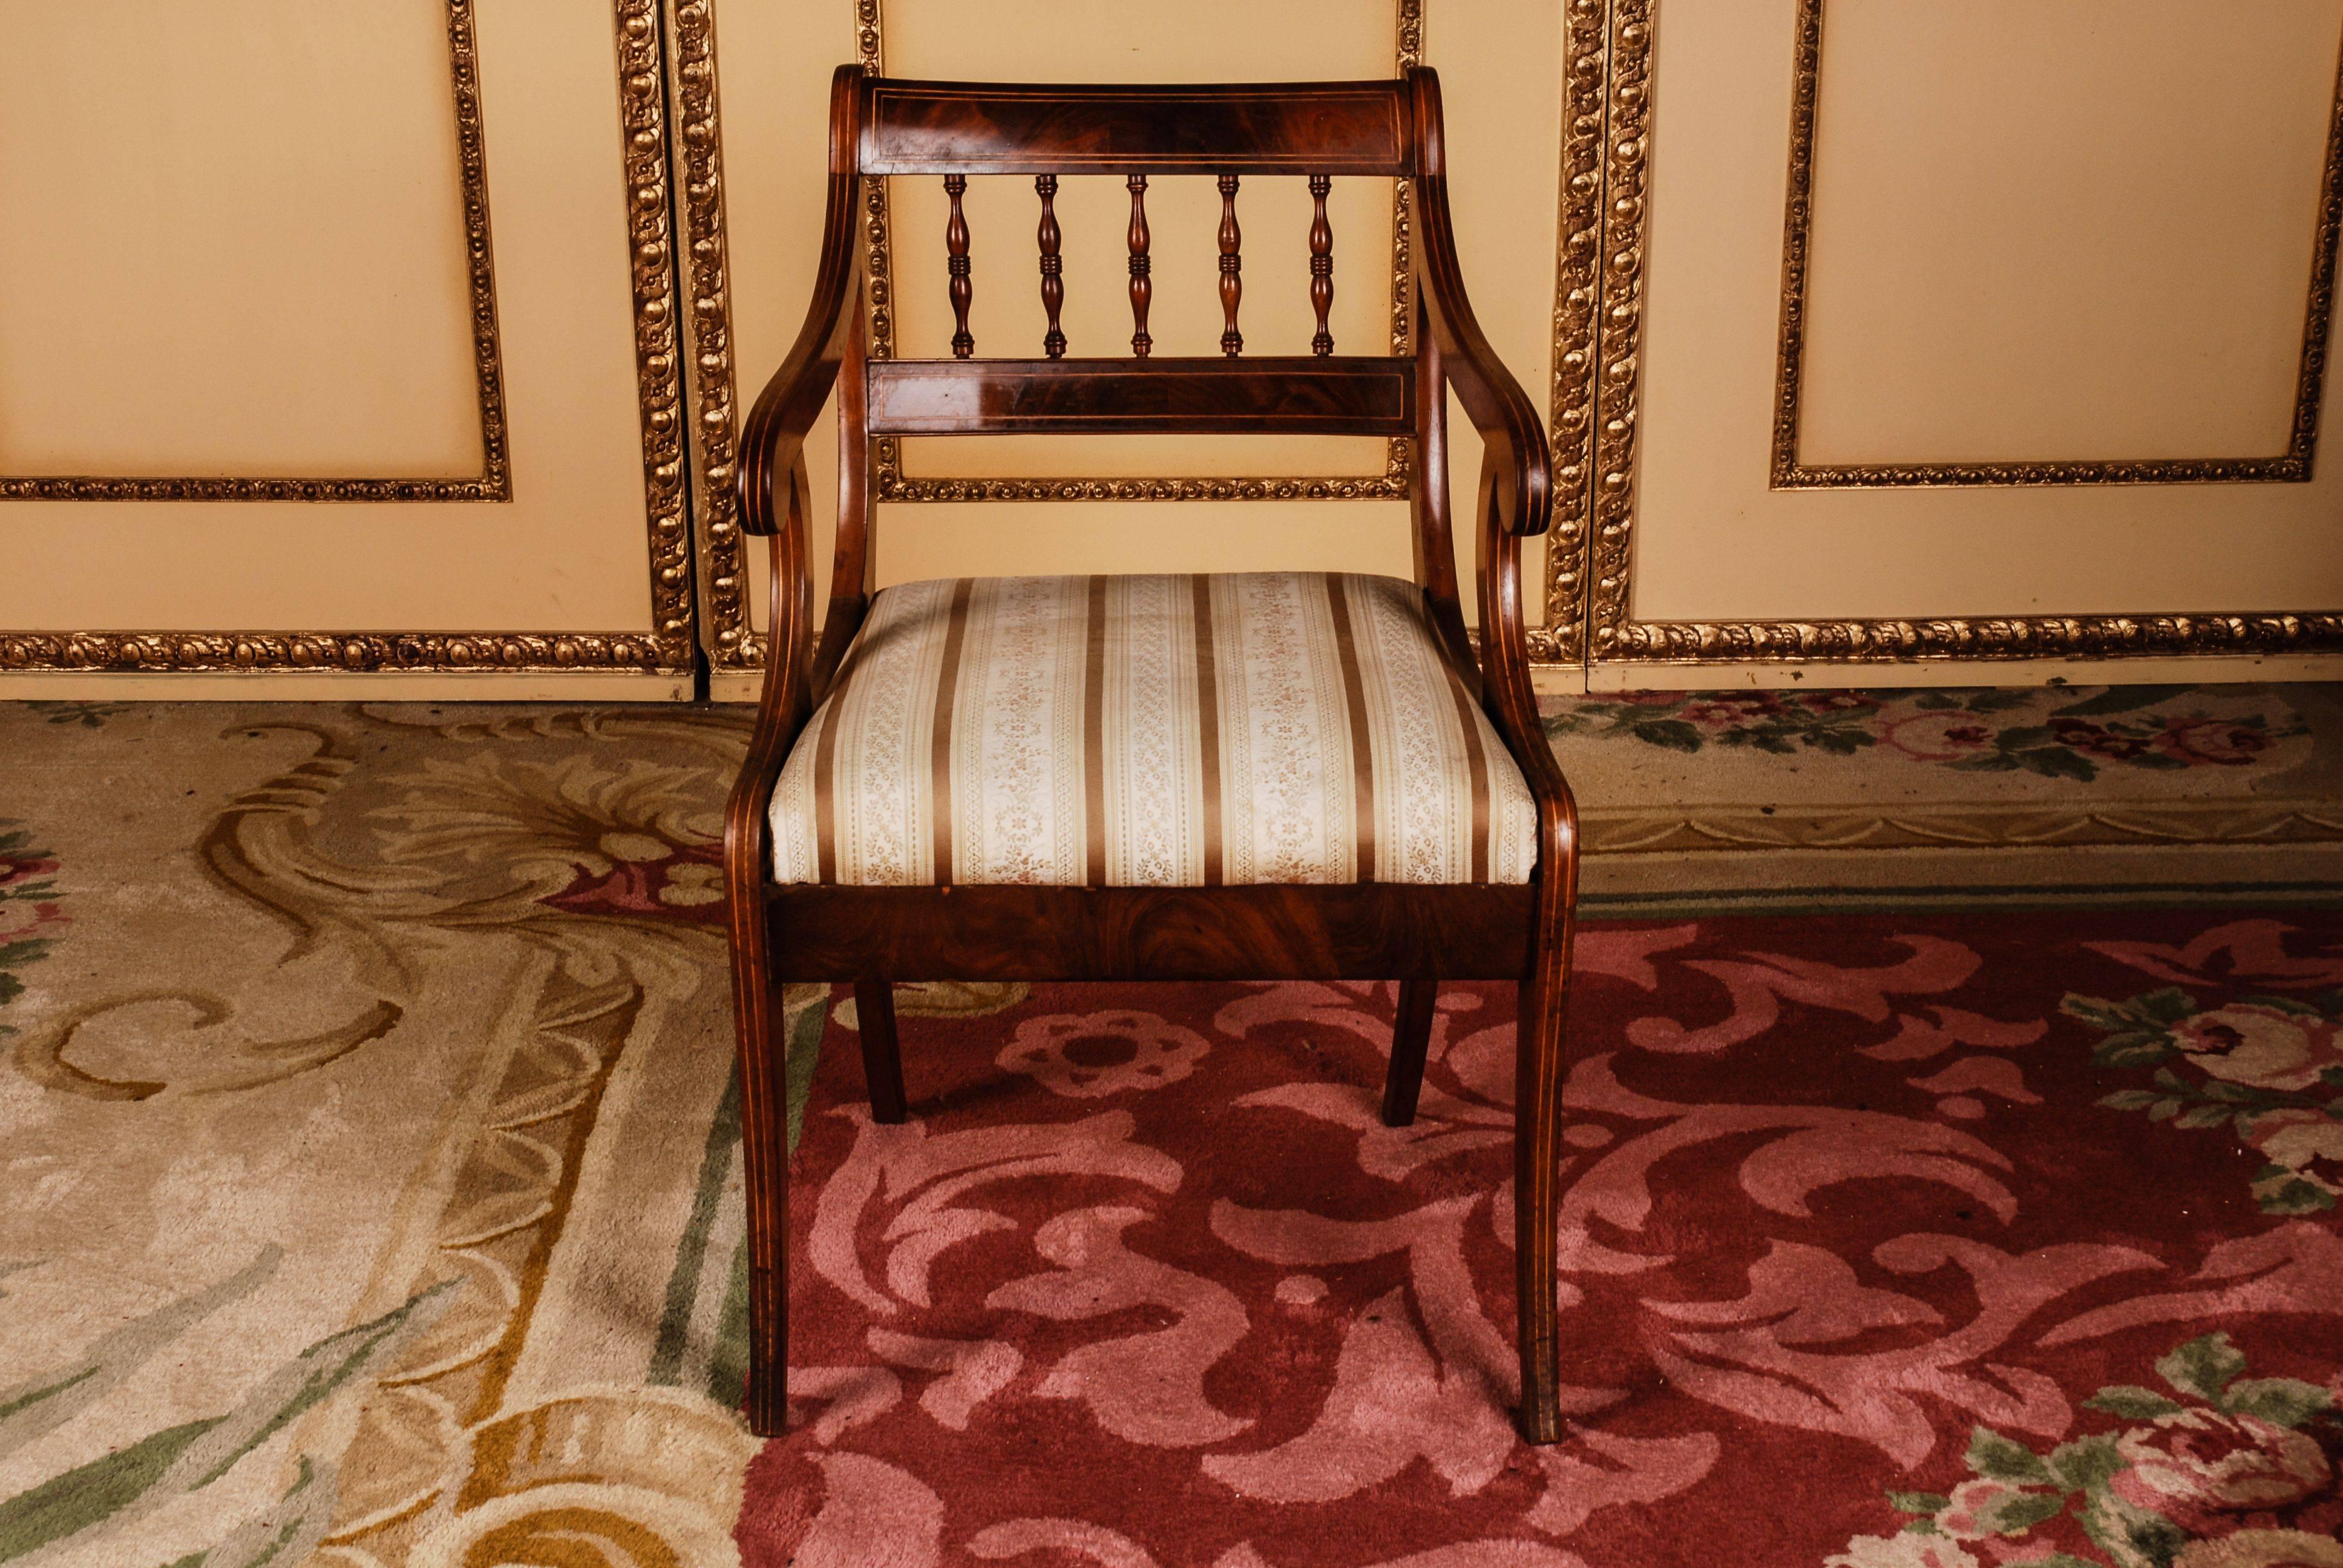 Solid Mahogany with maple inserts. Trapezoidal frame on saber-shaped legs. Strongly curved supports, ending in rolled volutes for slightly rising armrests. High-profile, shaped backrest frame with a wide finish.

(B-114).